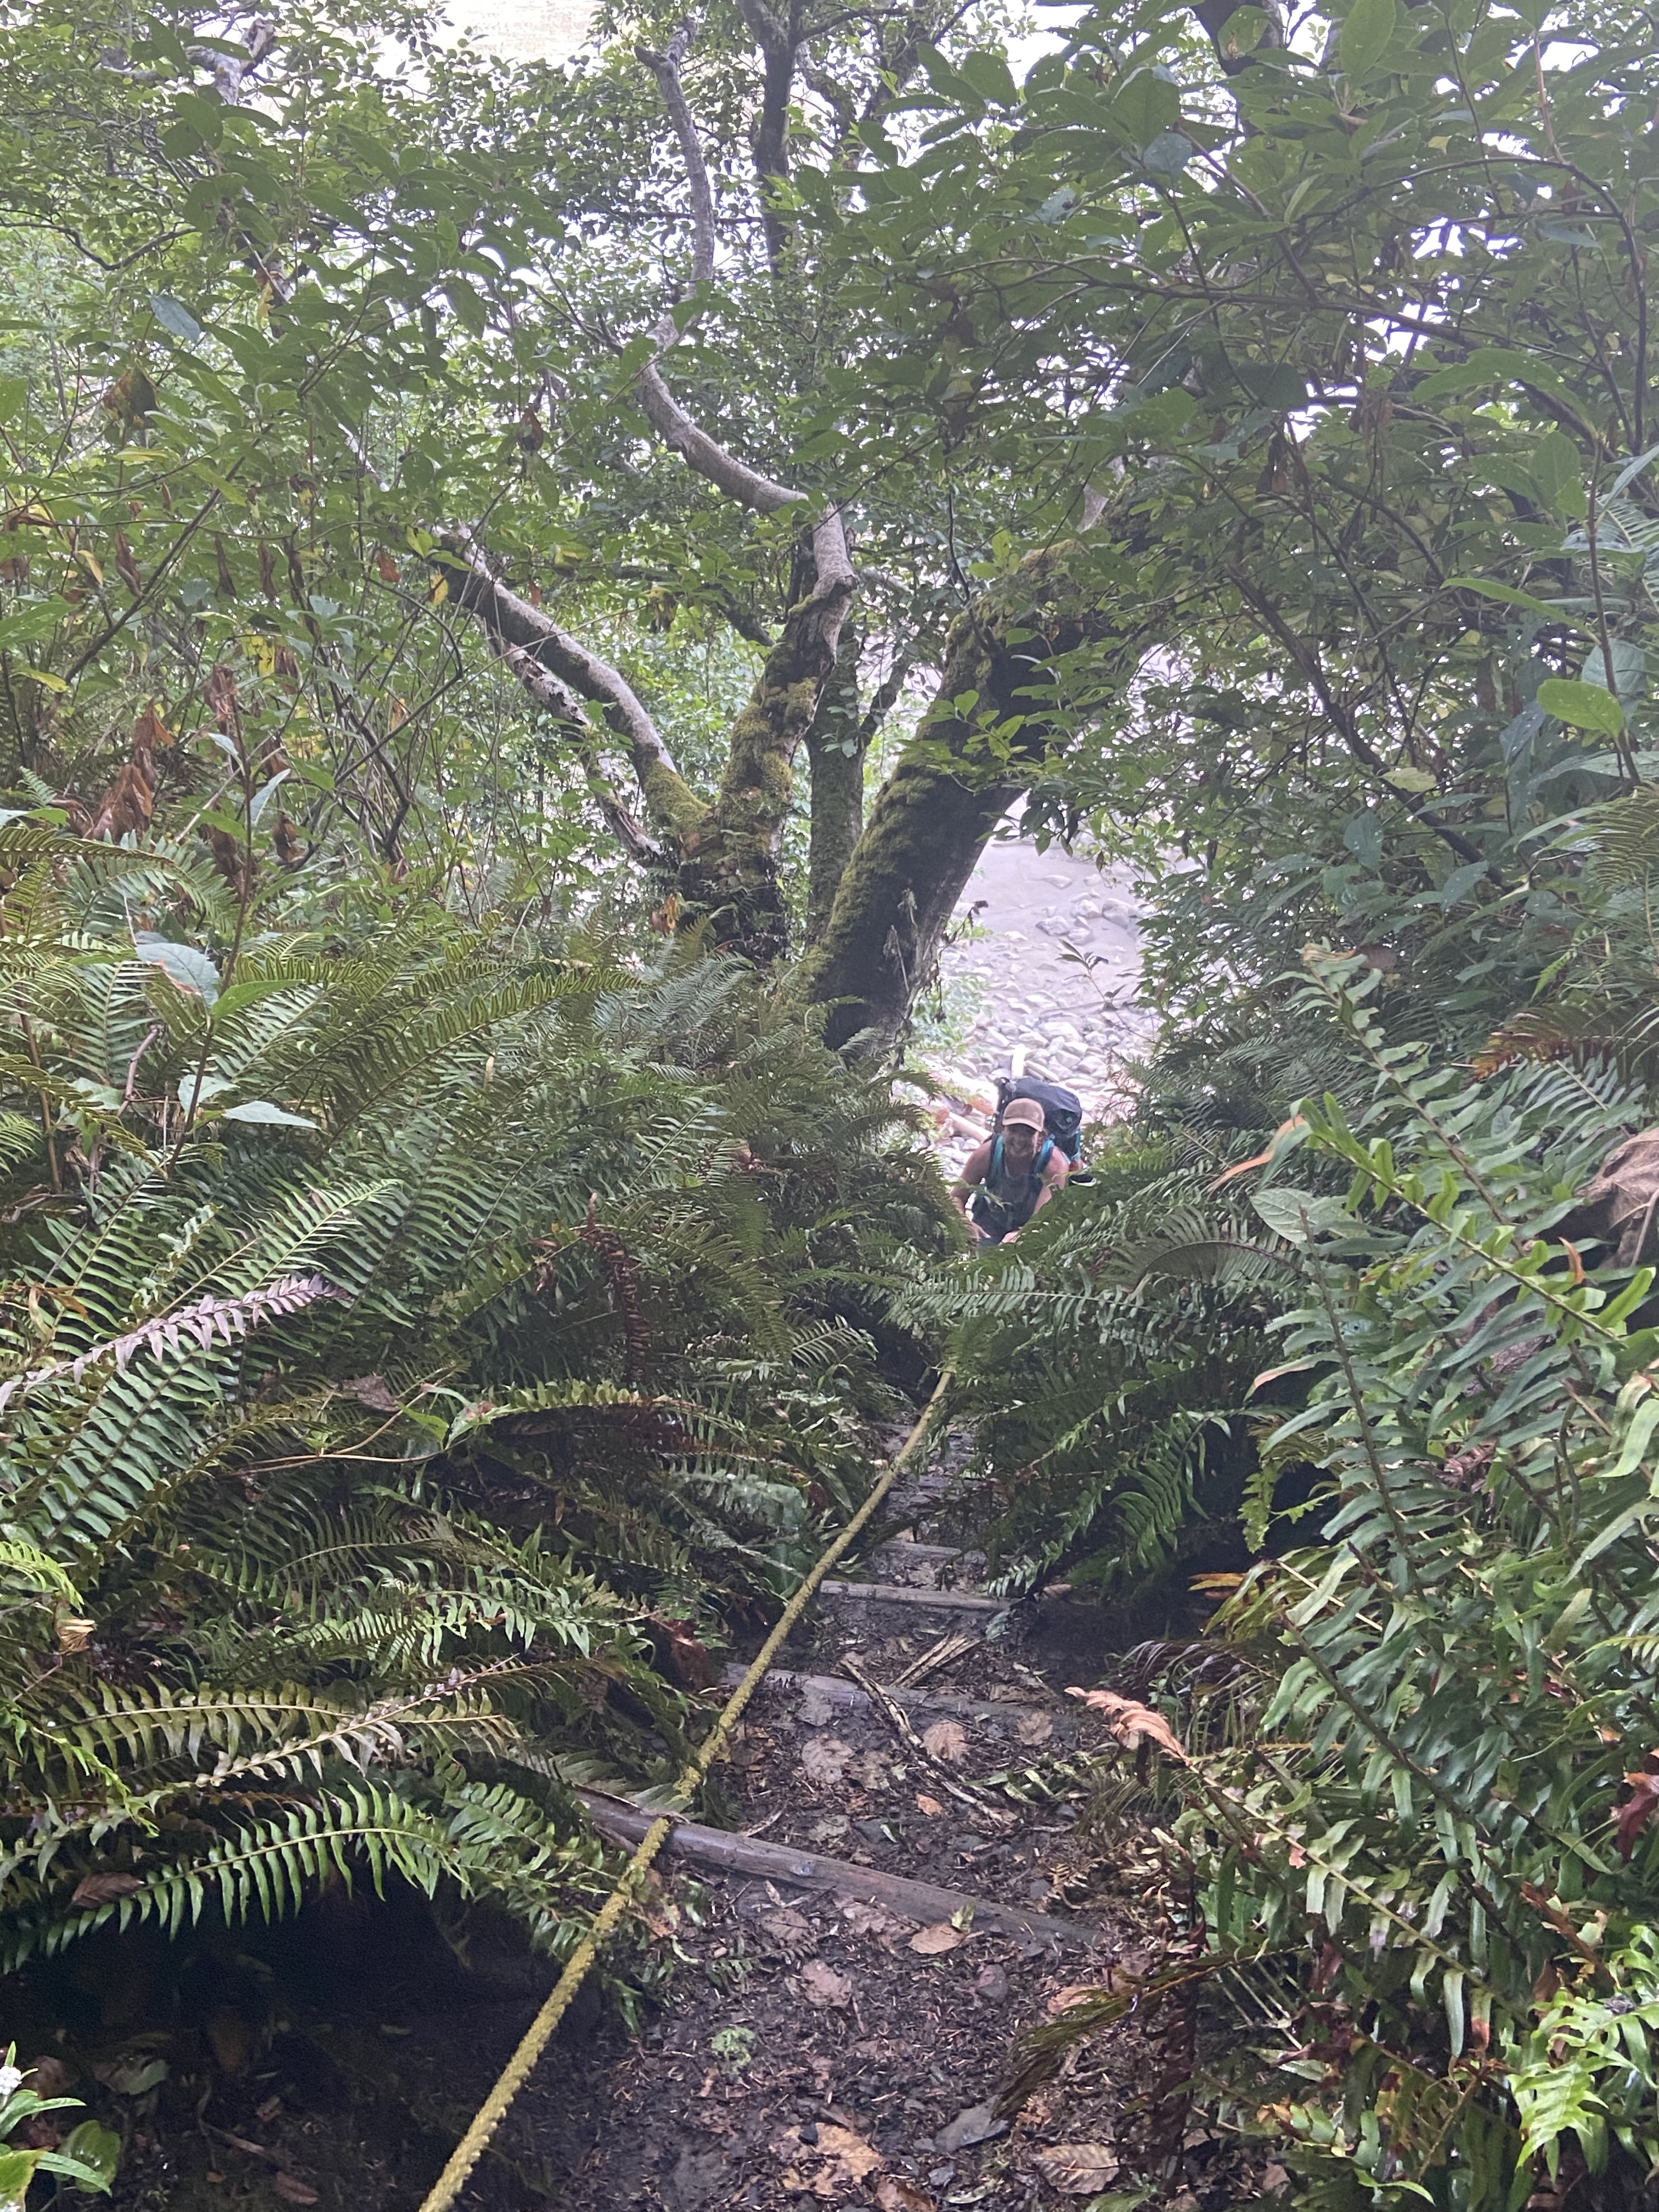 A woman ascending a steep slope using a rope as a guide.